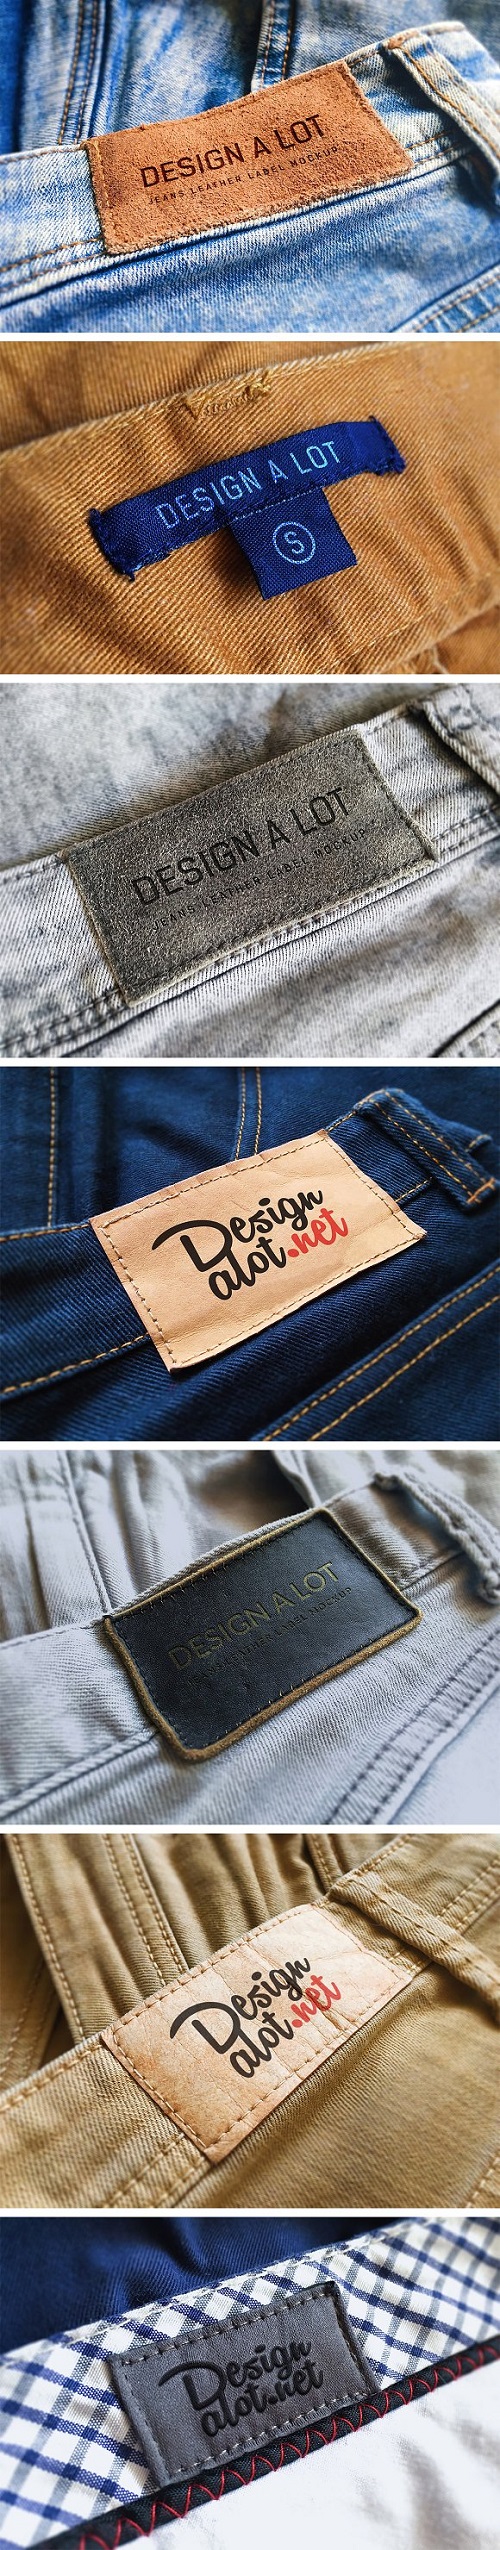 7 Jeans and Pants Label Mockups 789964